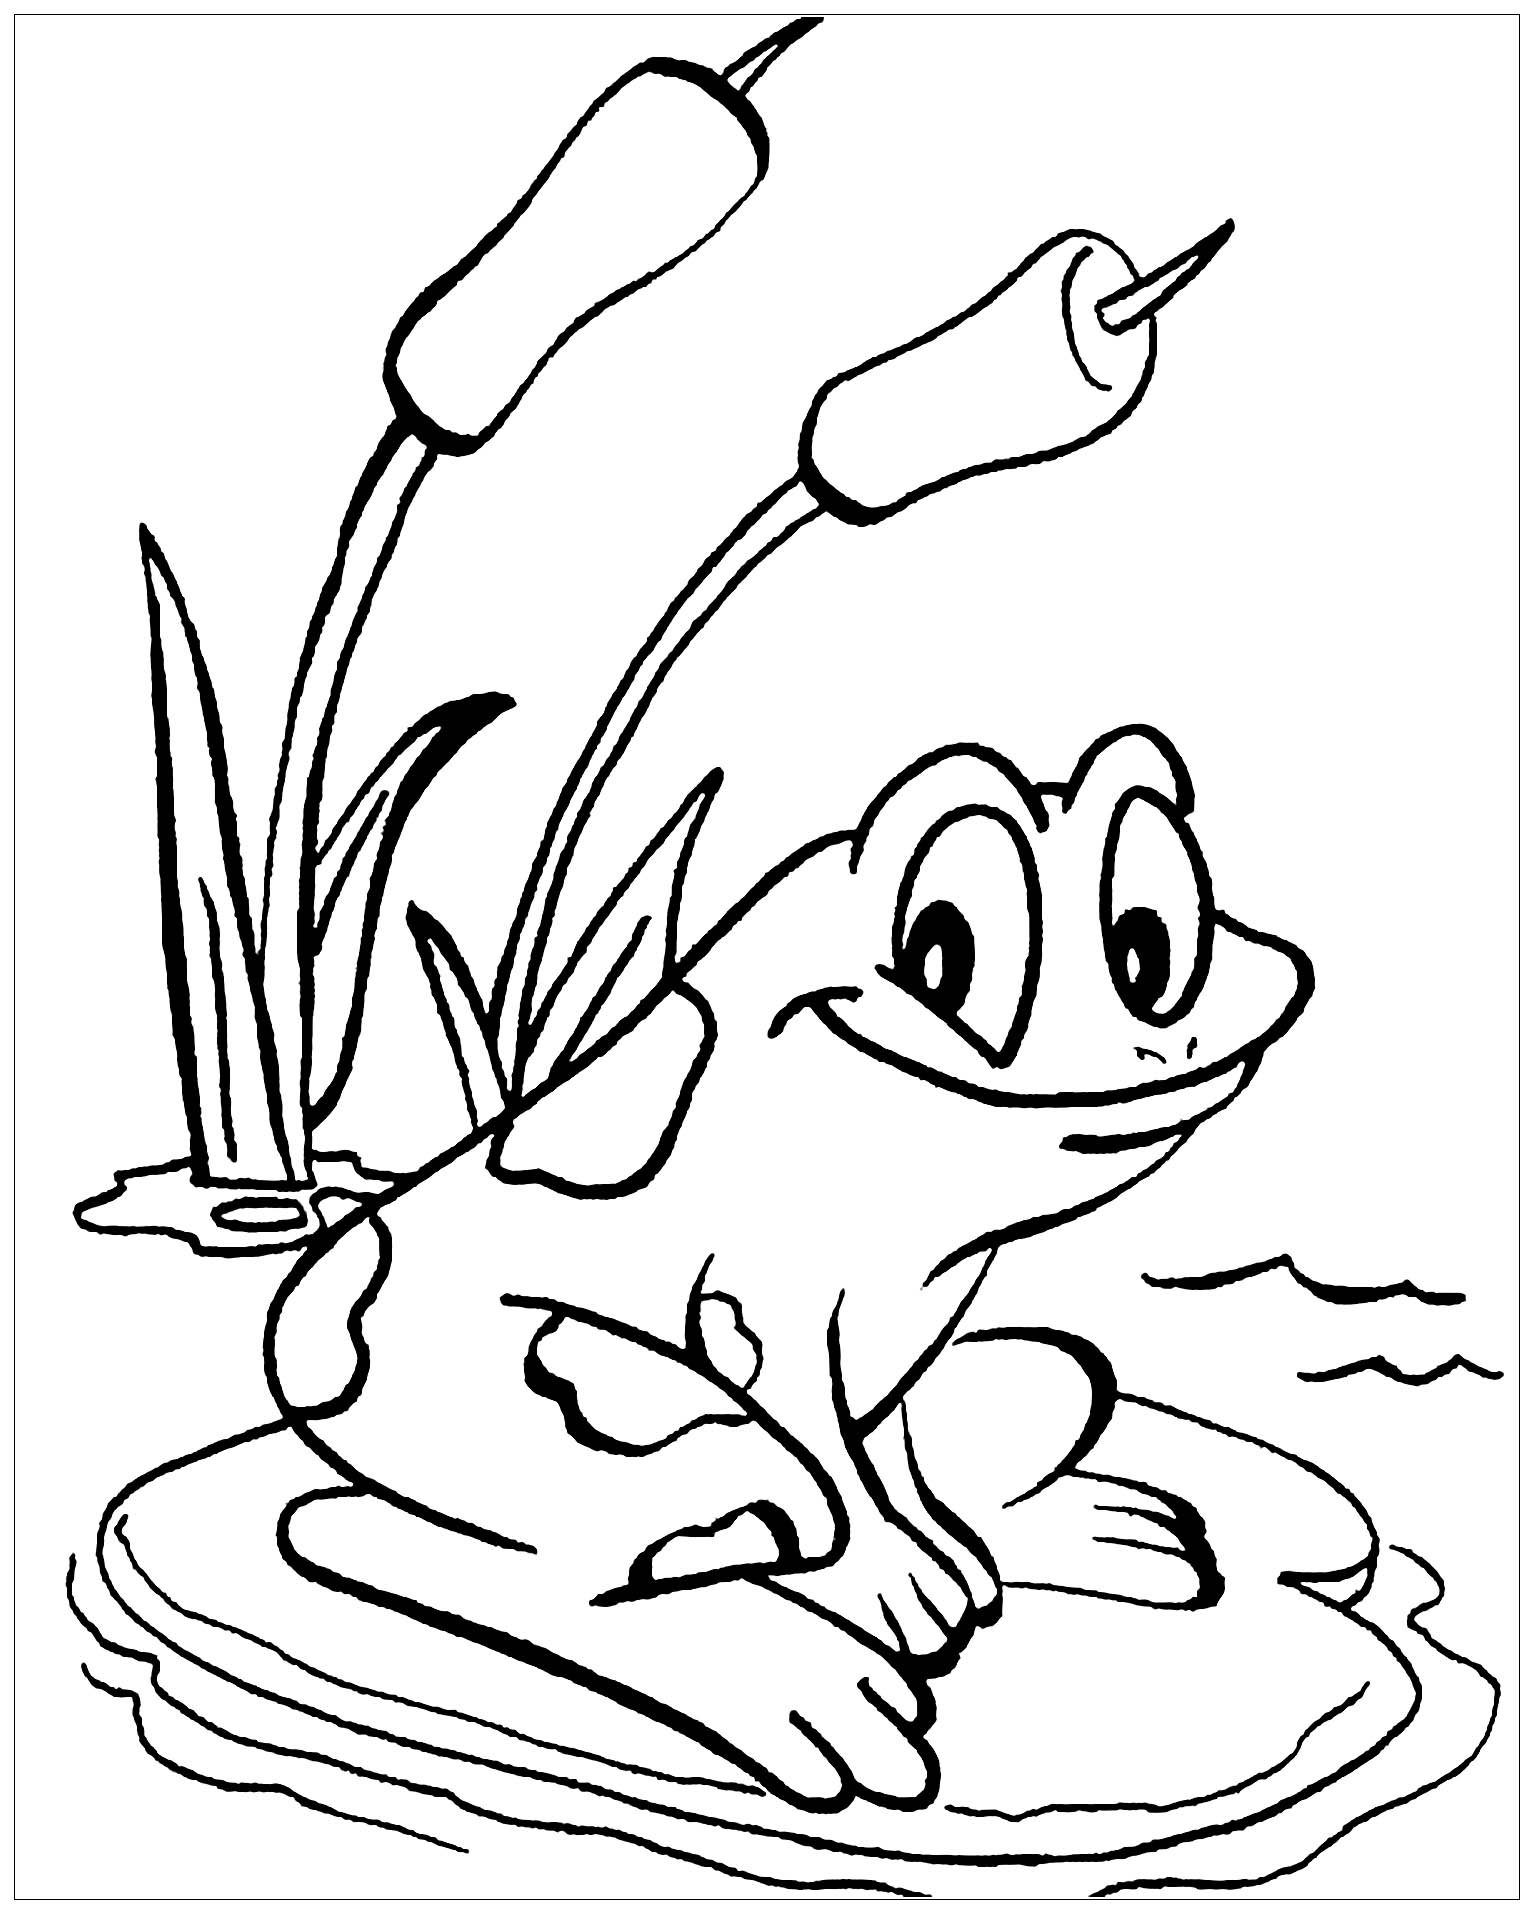 Download Frogs To Color For Kids Frogs Kids Coloring Pages